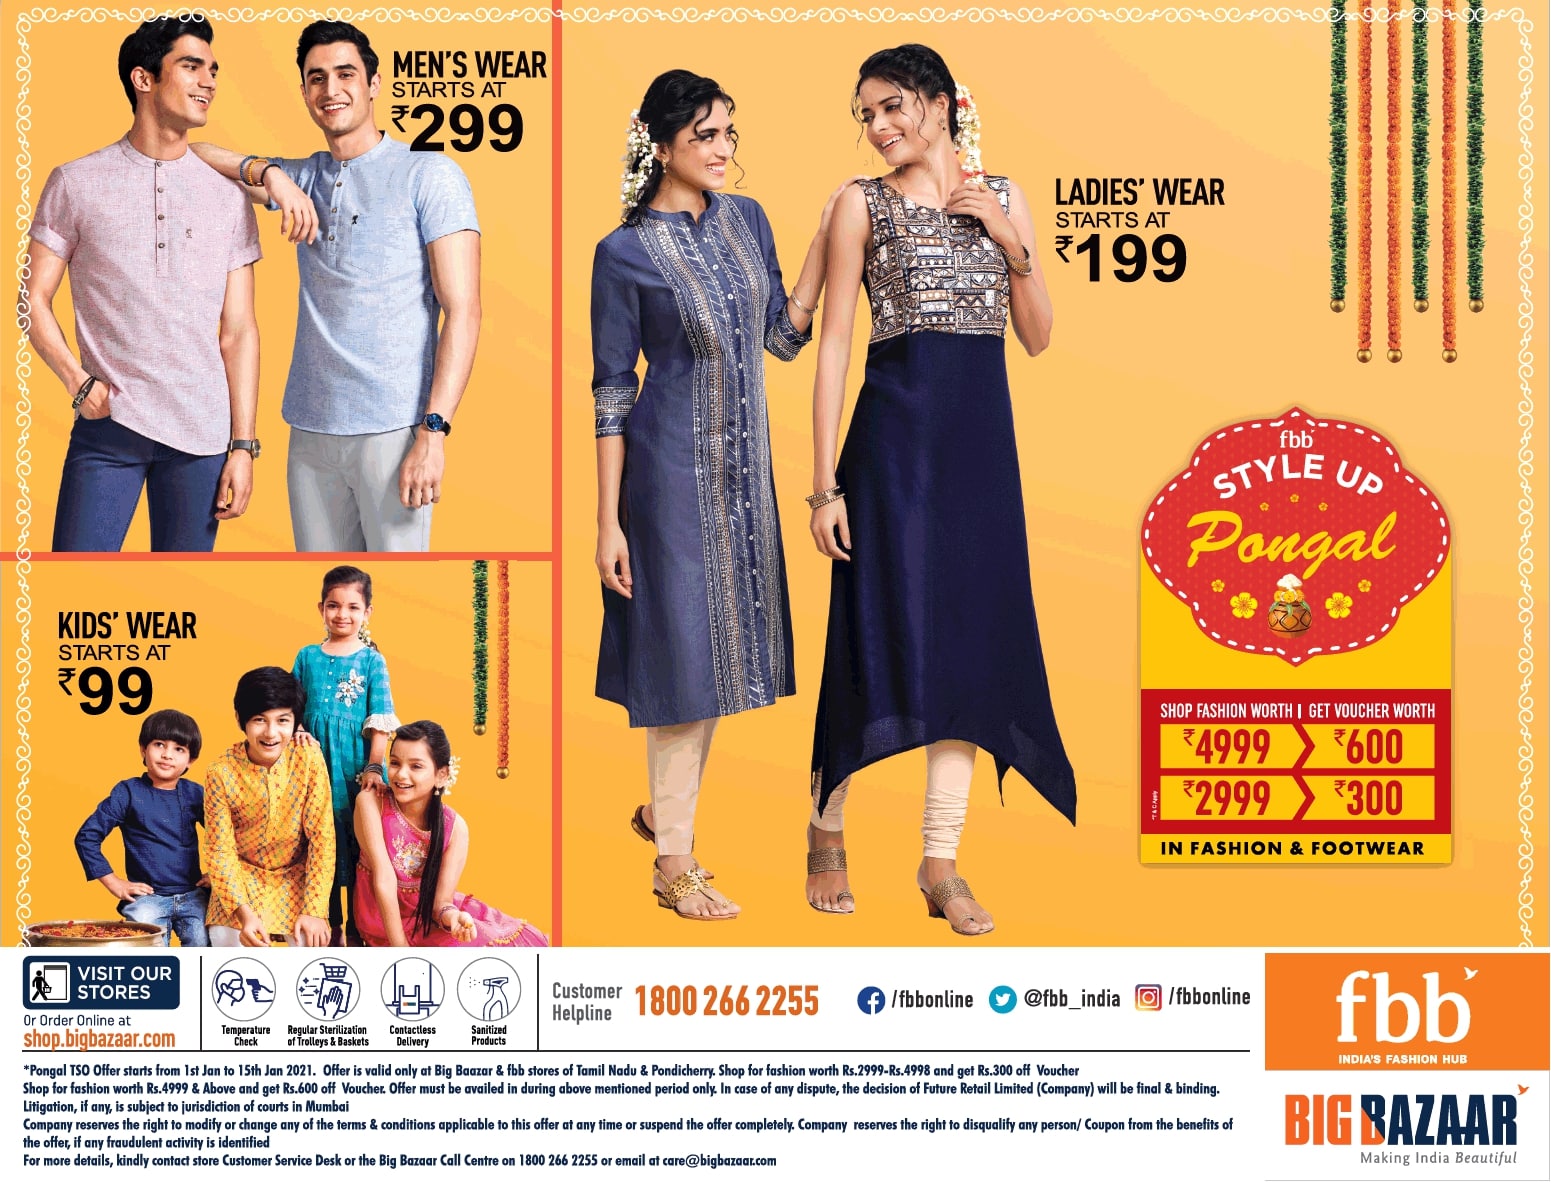 big-bazaar-fbb-style-up-pongal-visit-our-stores-ad-chennai-times-09-01-2021